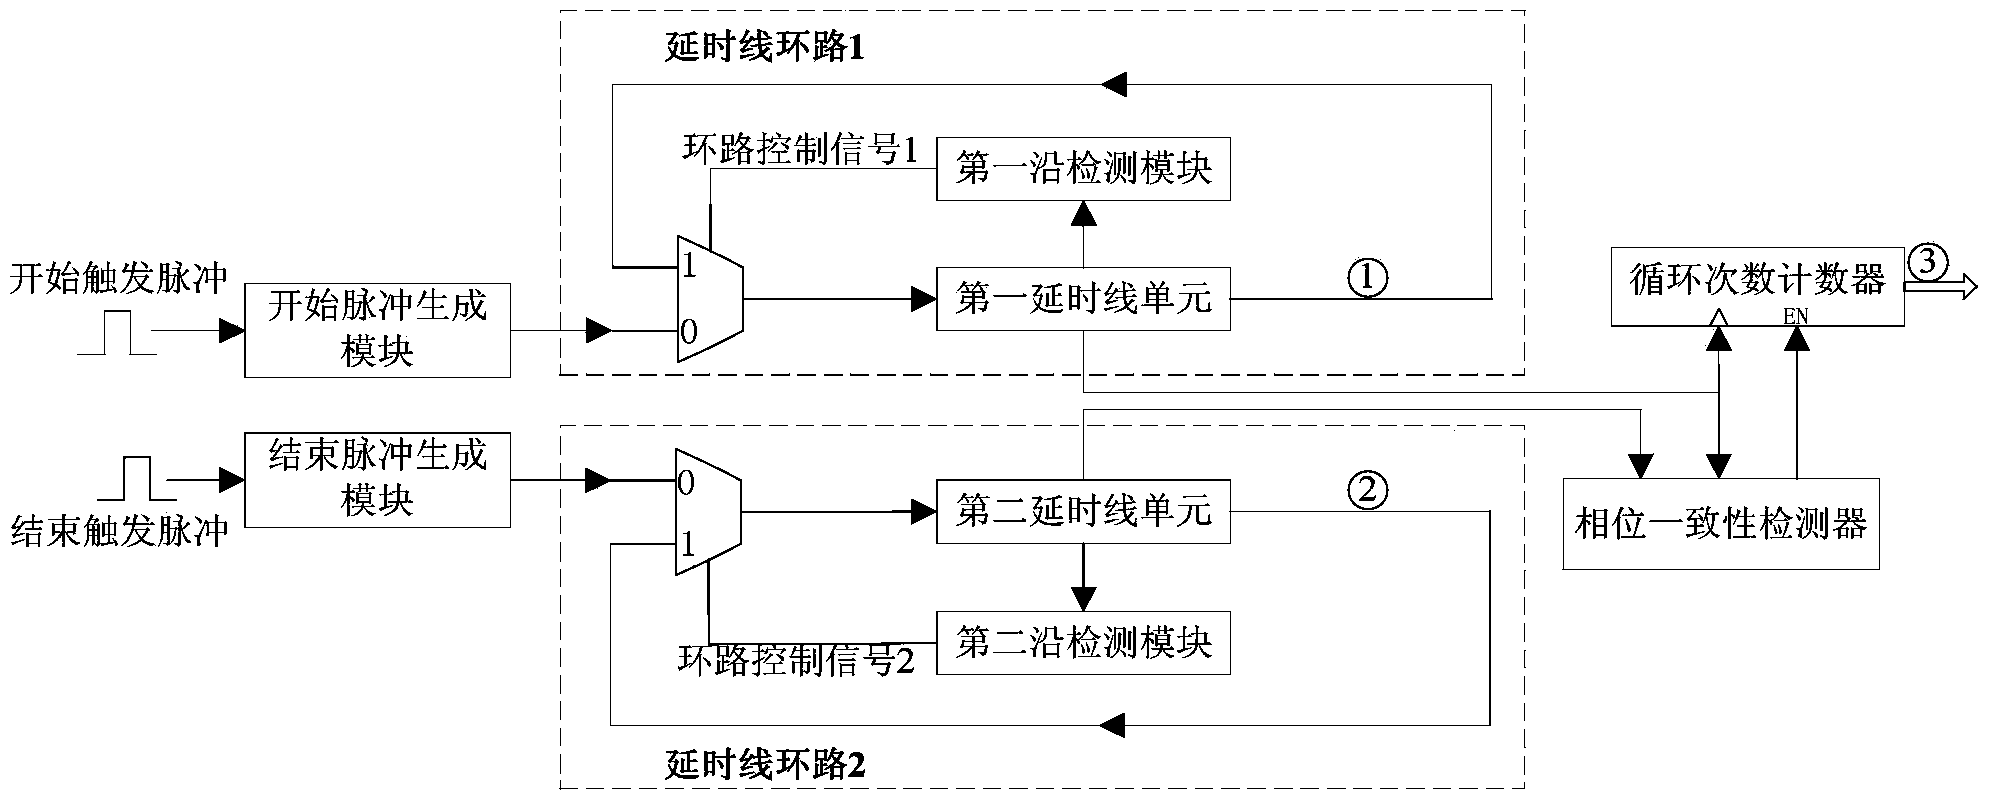 Time digitizer based on delay ring flop-out method and time interval measuring method